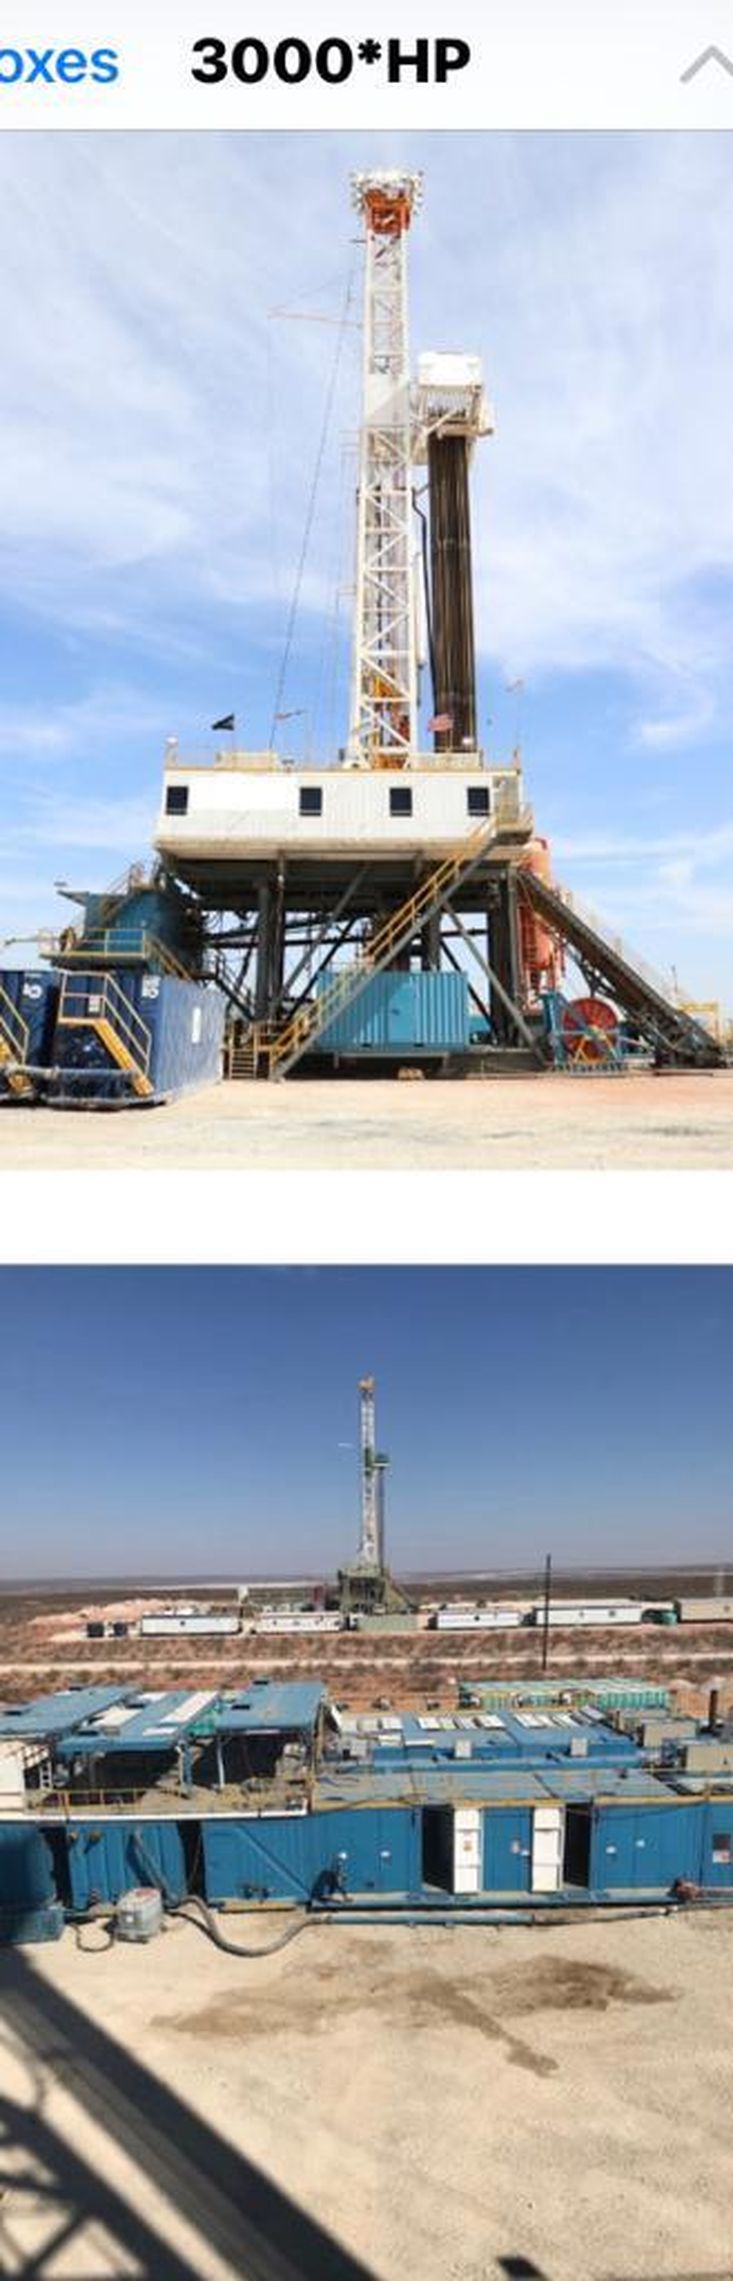 3,000 hp Triple Mast Pad Land Drilling Rig - Available for Sale